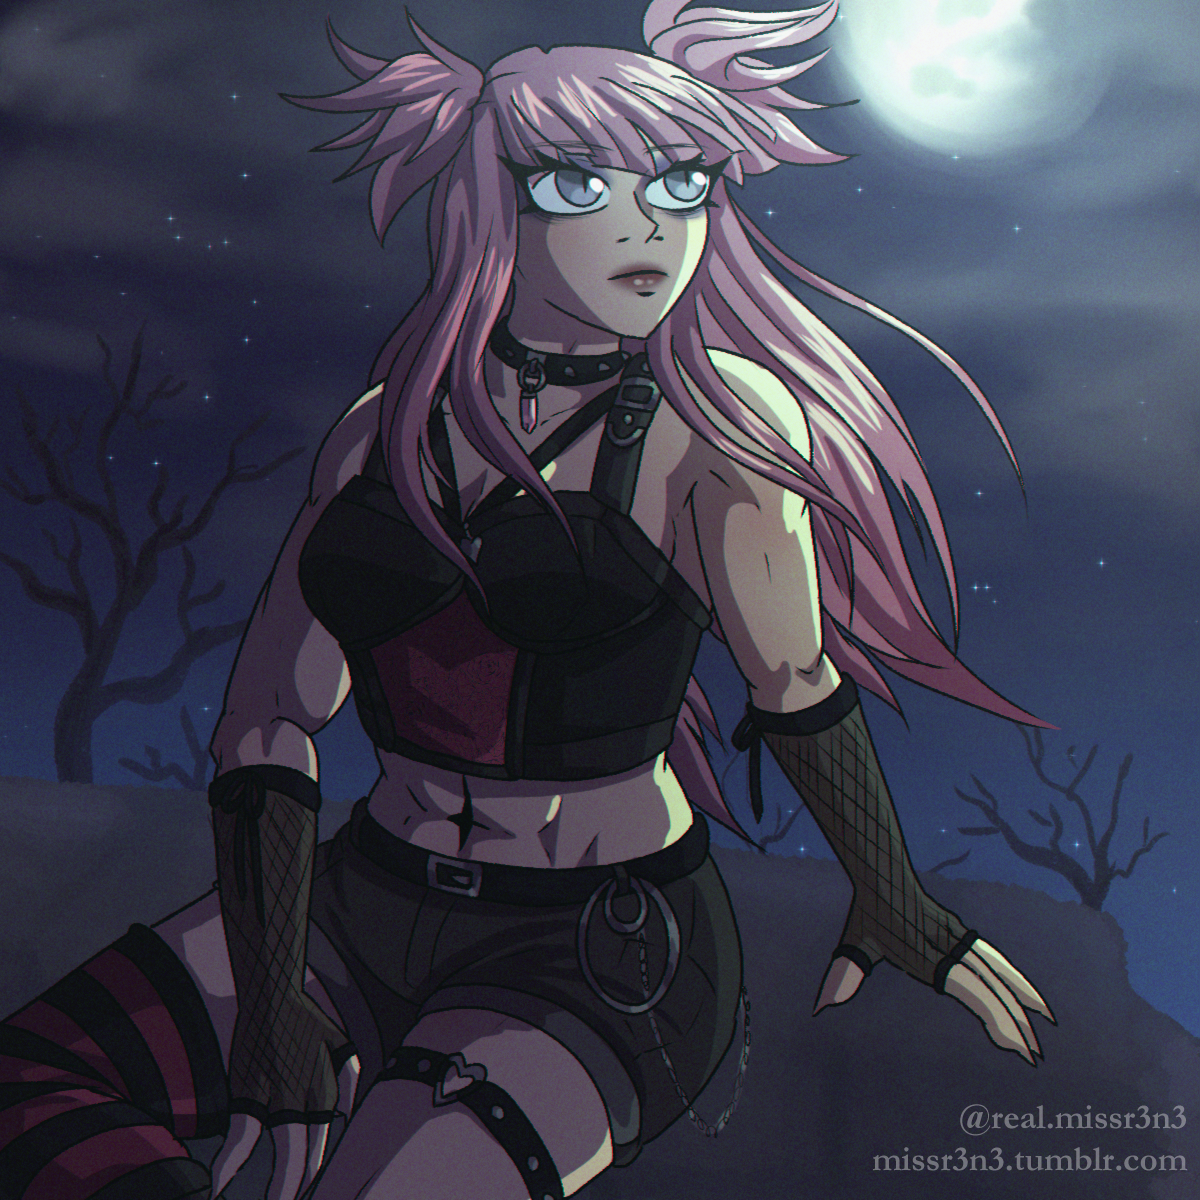 rose from rad mad venture wearing modern goth clothes while sitting on some ruins. she faces the full moon as the wind blows through her hair